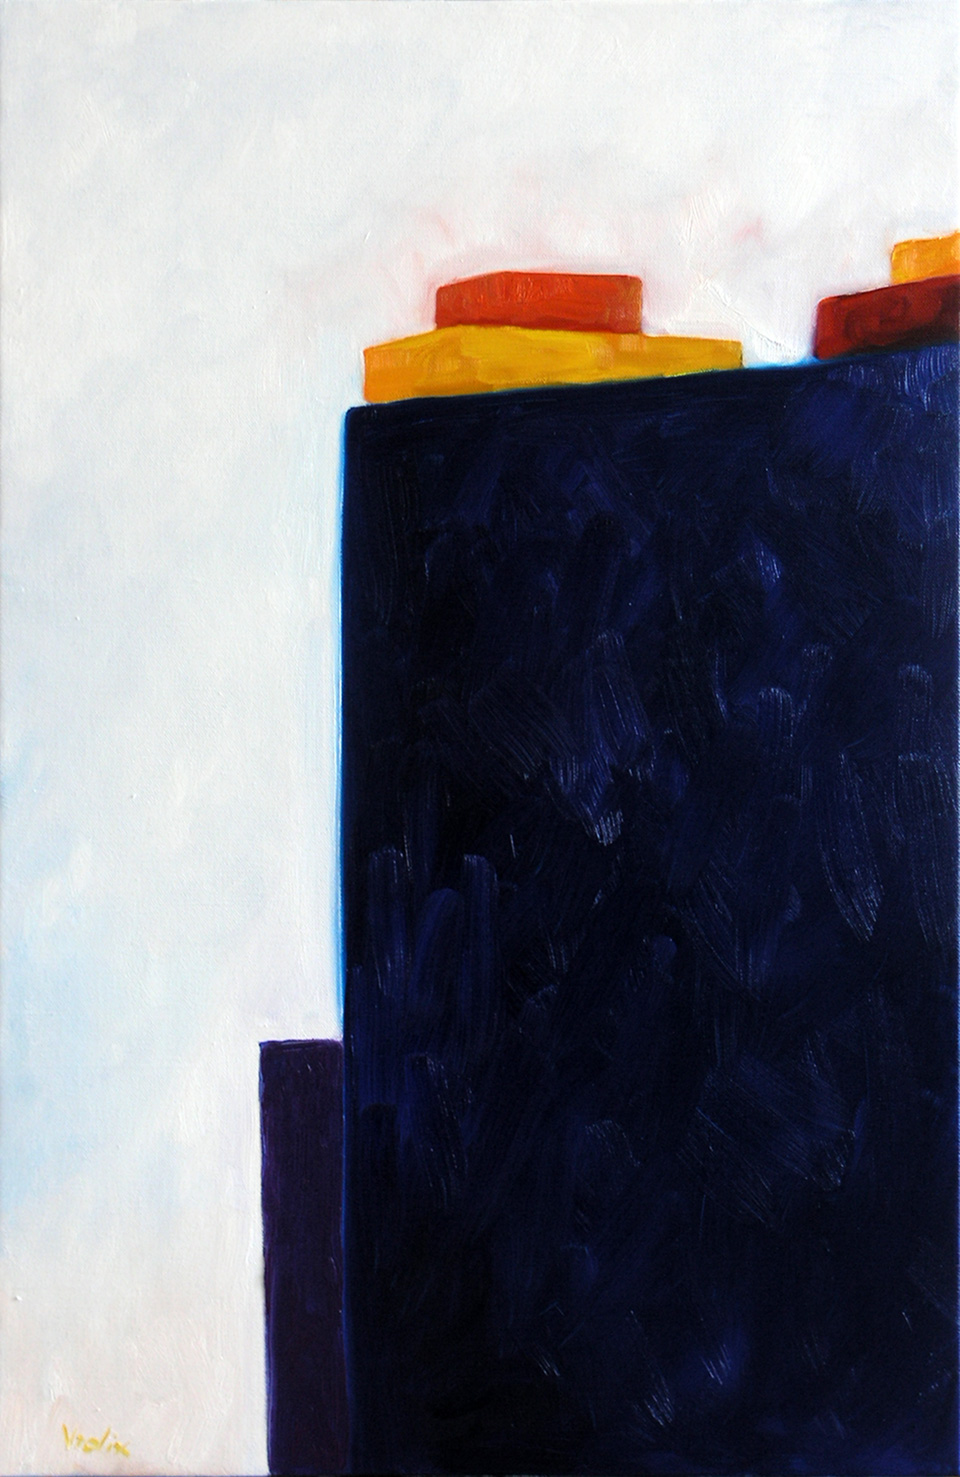 Boxes, a painting by Guido Vrolix